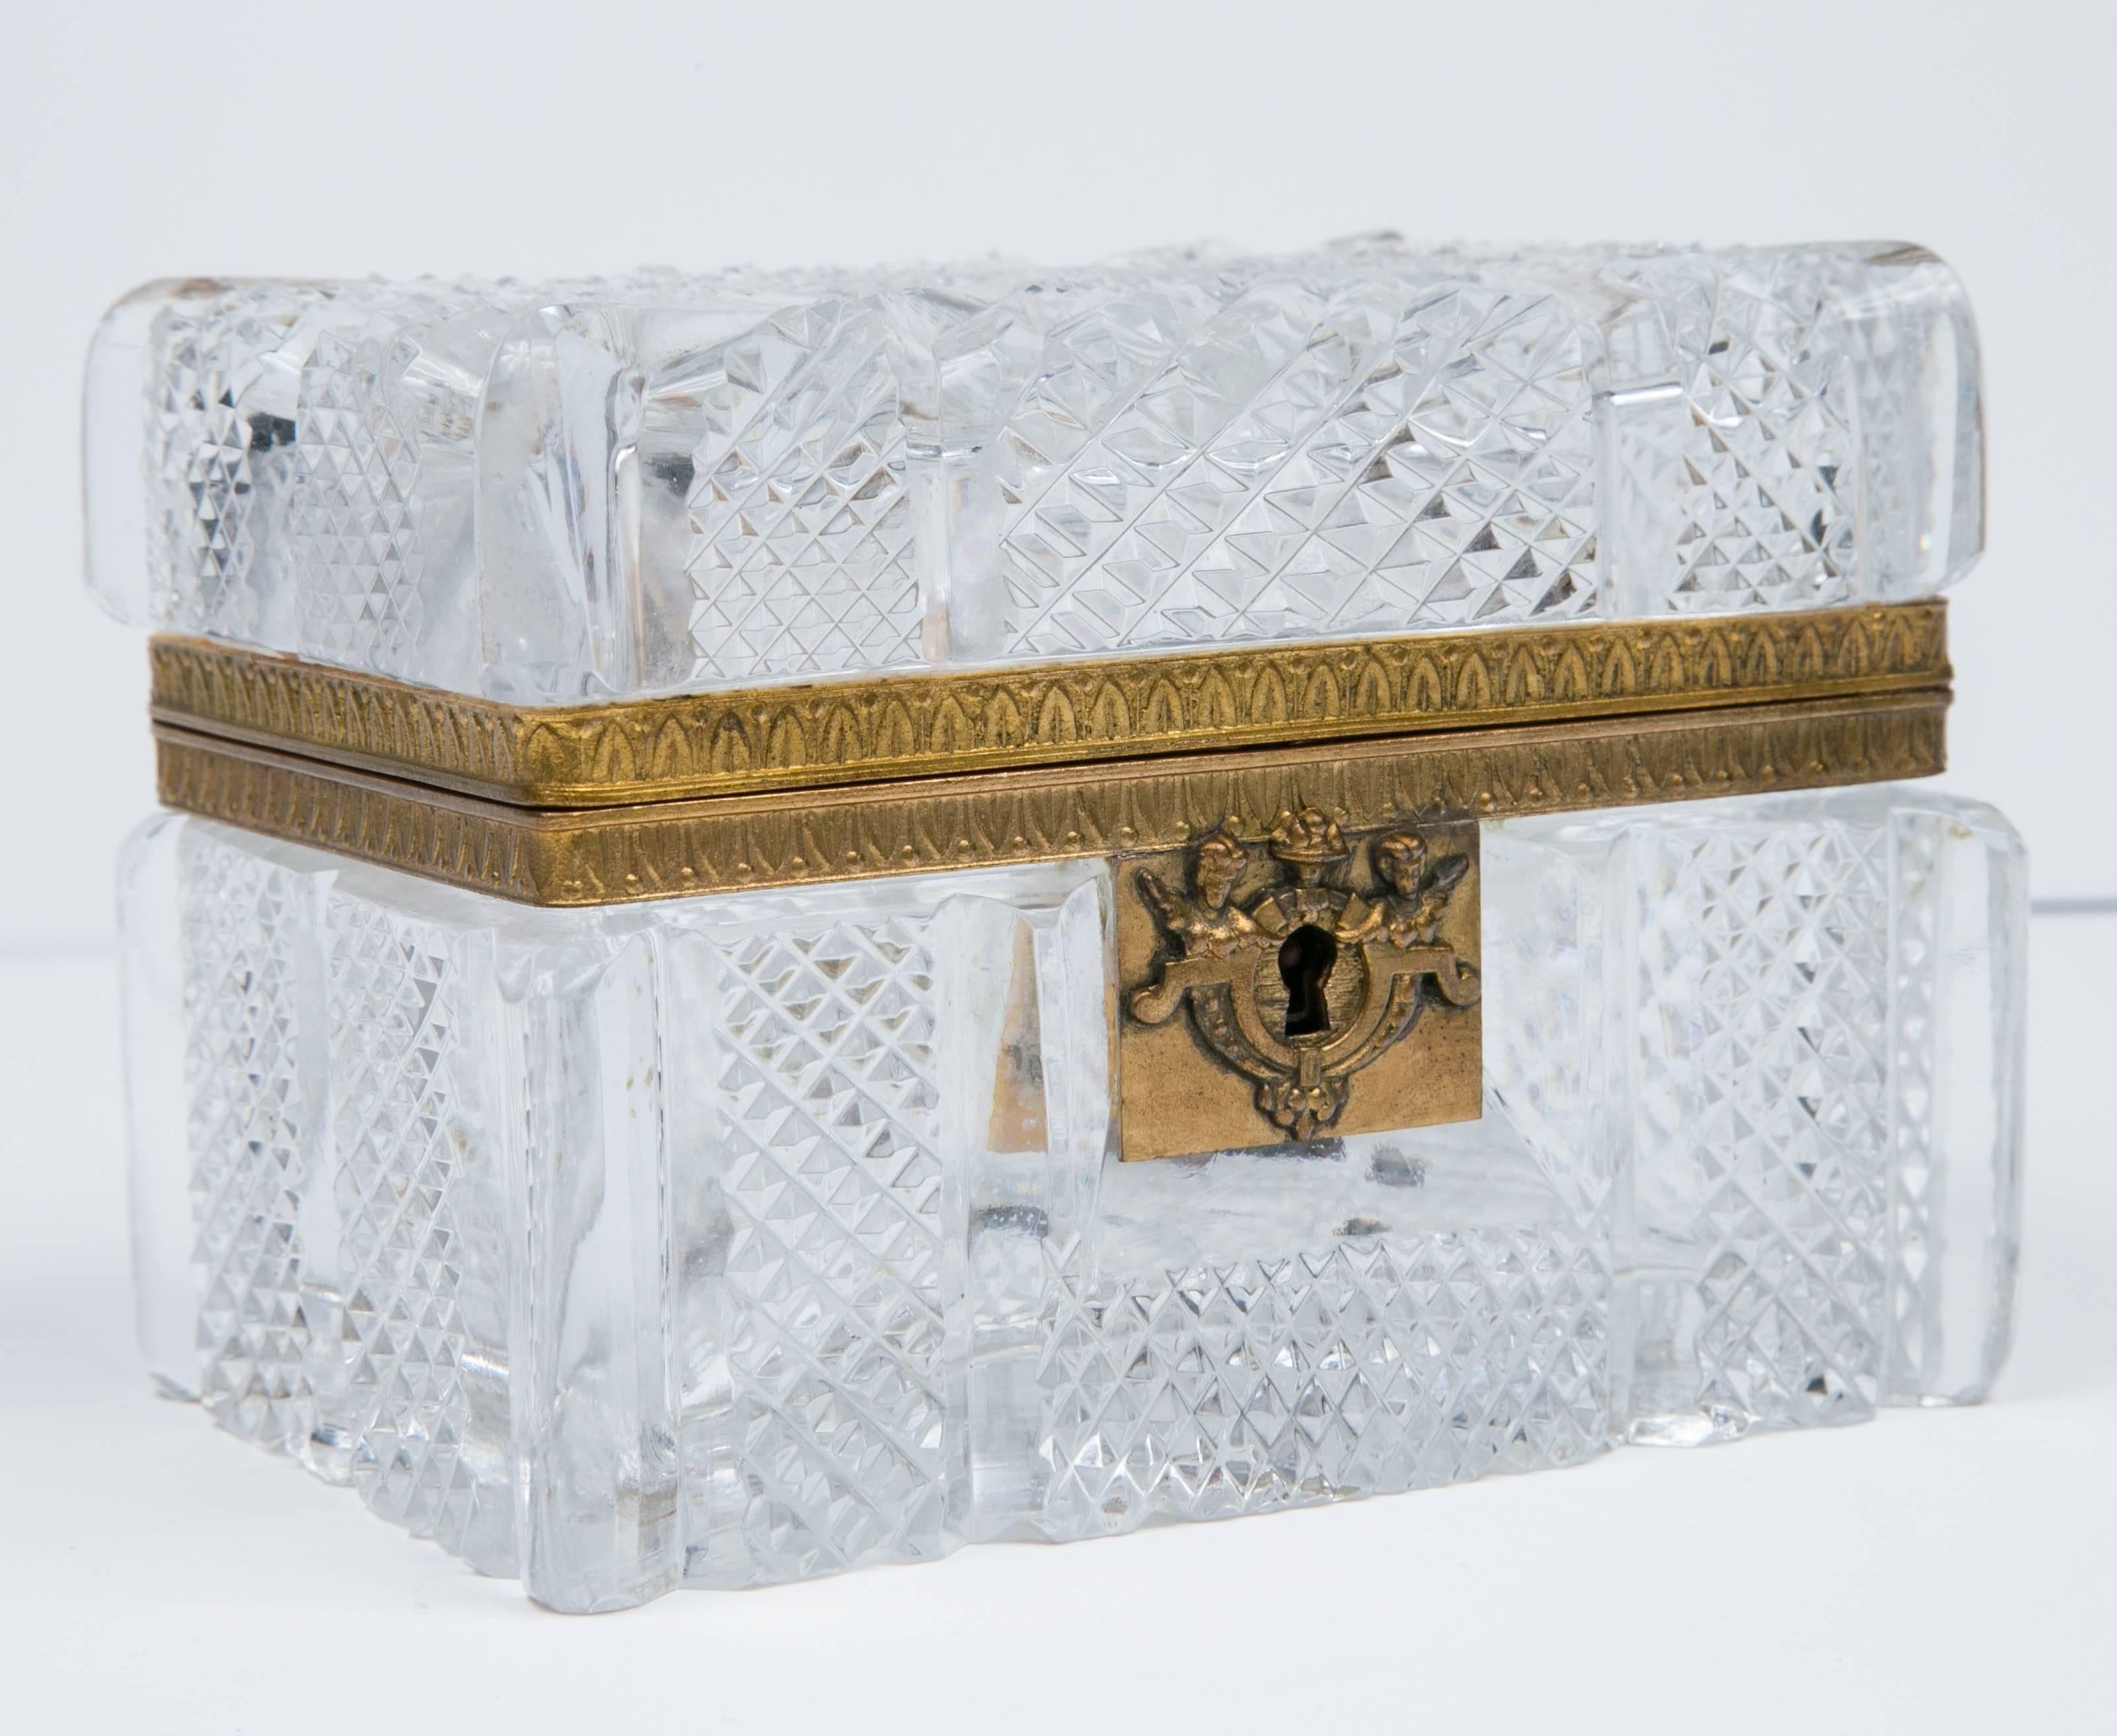 Antique French cut crystal and bronze box in pristine condition. Ornate cut crystal complements the bronze detailing and key hole.